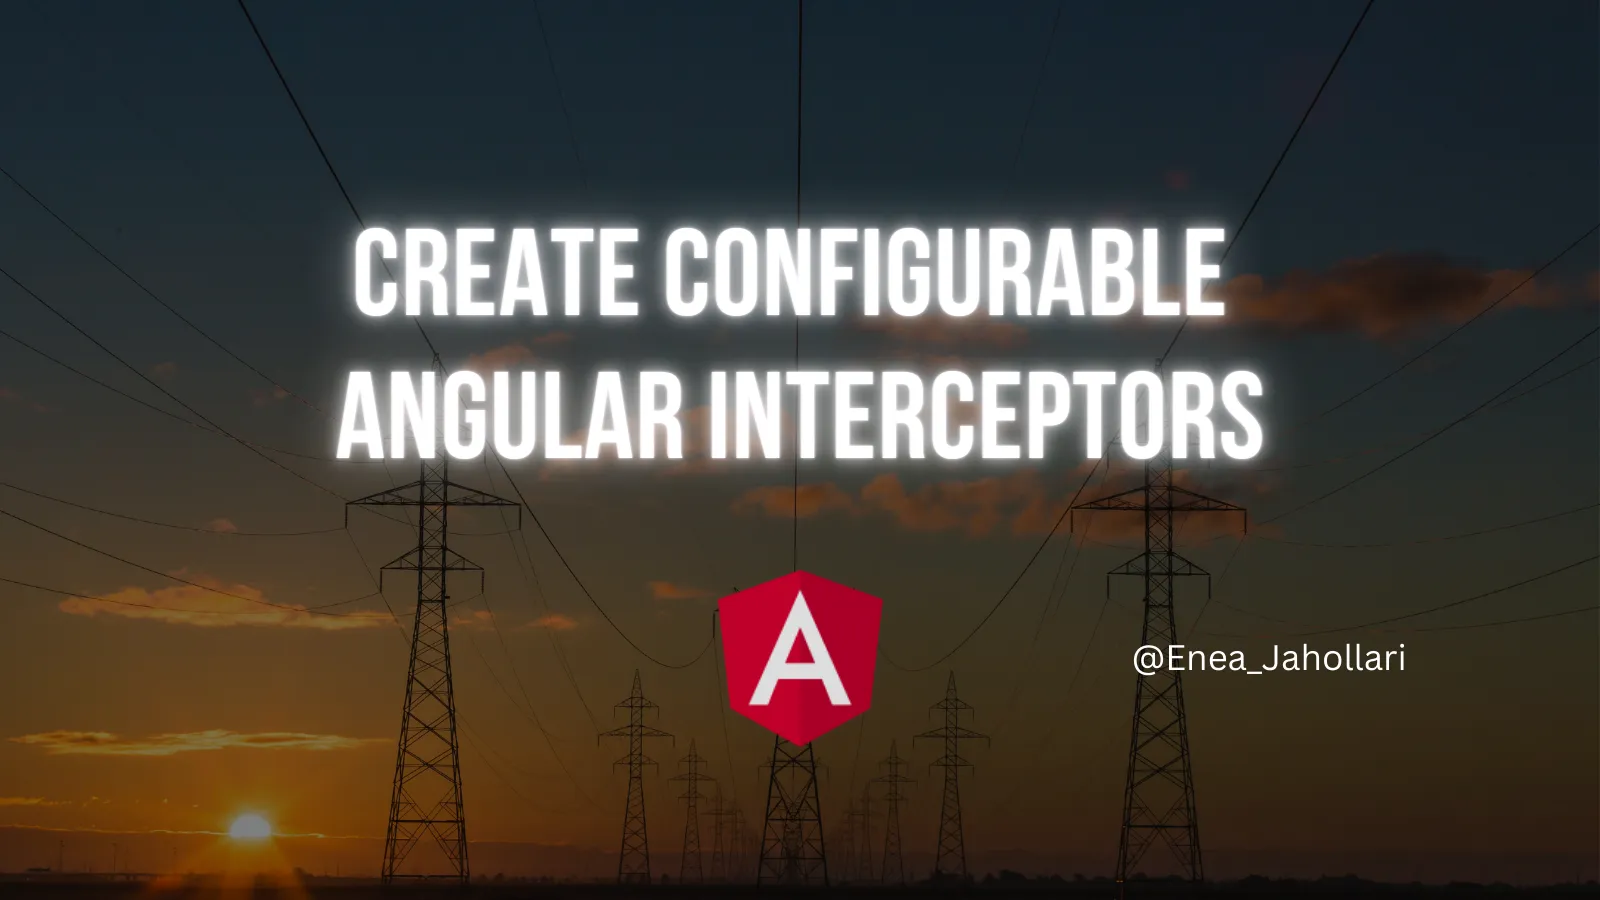 When working with Angular interceptors, there are times we want to configure them based on the context of the application. So, if we want to export the interceptor as a library, we want to be able to…